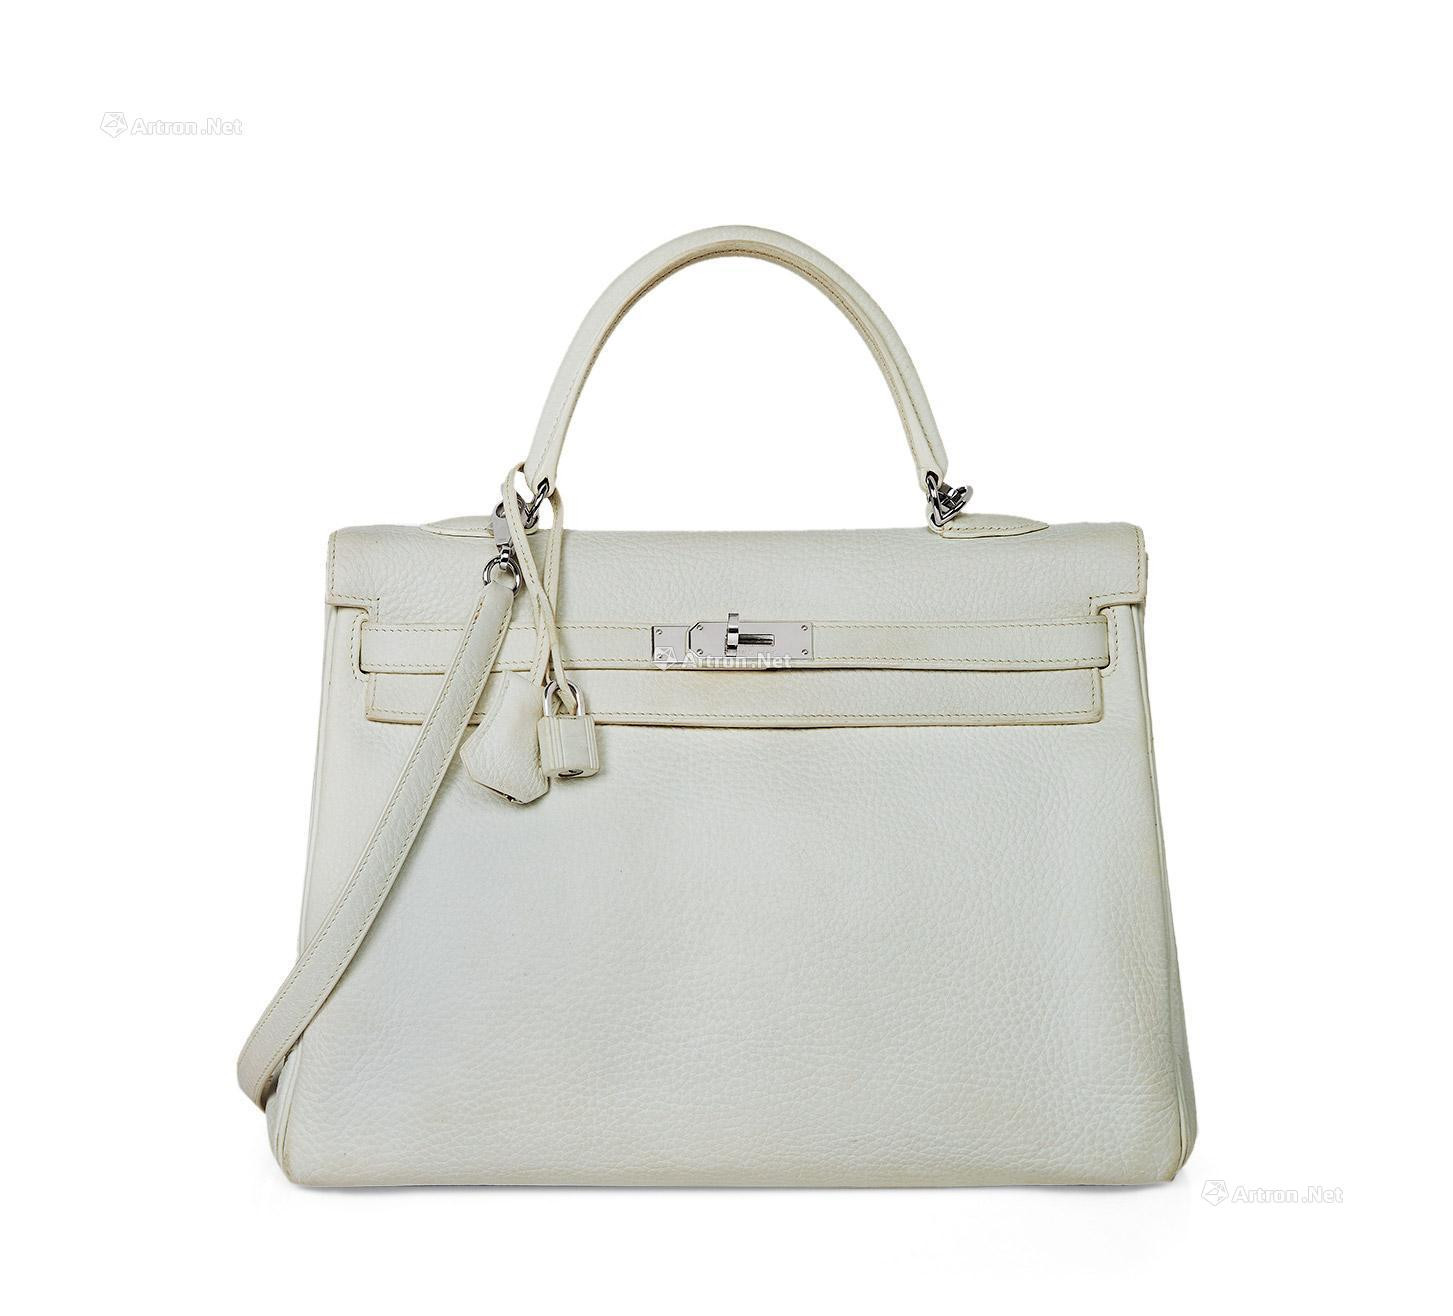 HERMES 2007　A WHITE LEATHER KELLY 35 WITH PALLADIUM HARDWARE